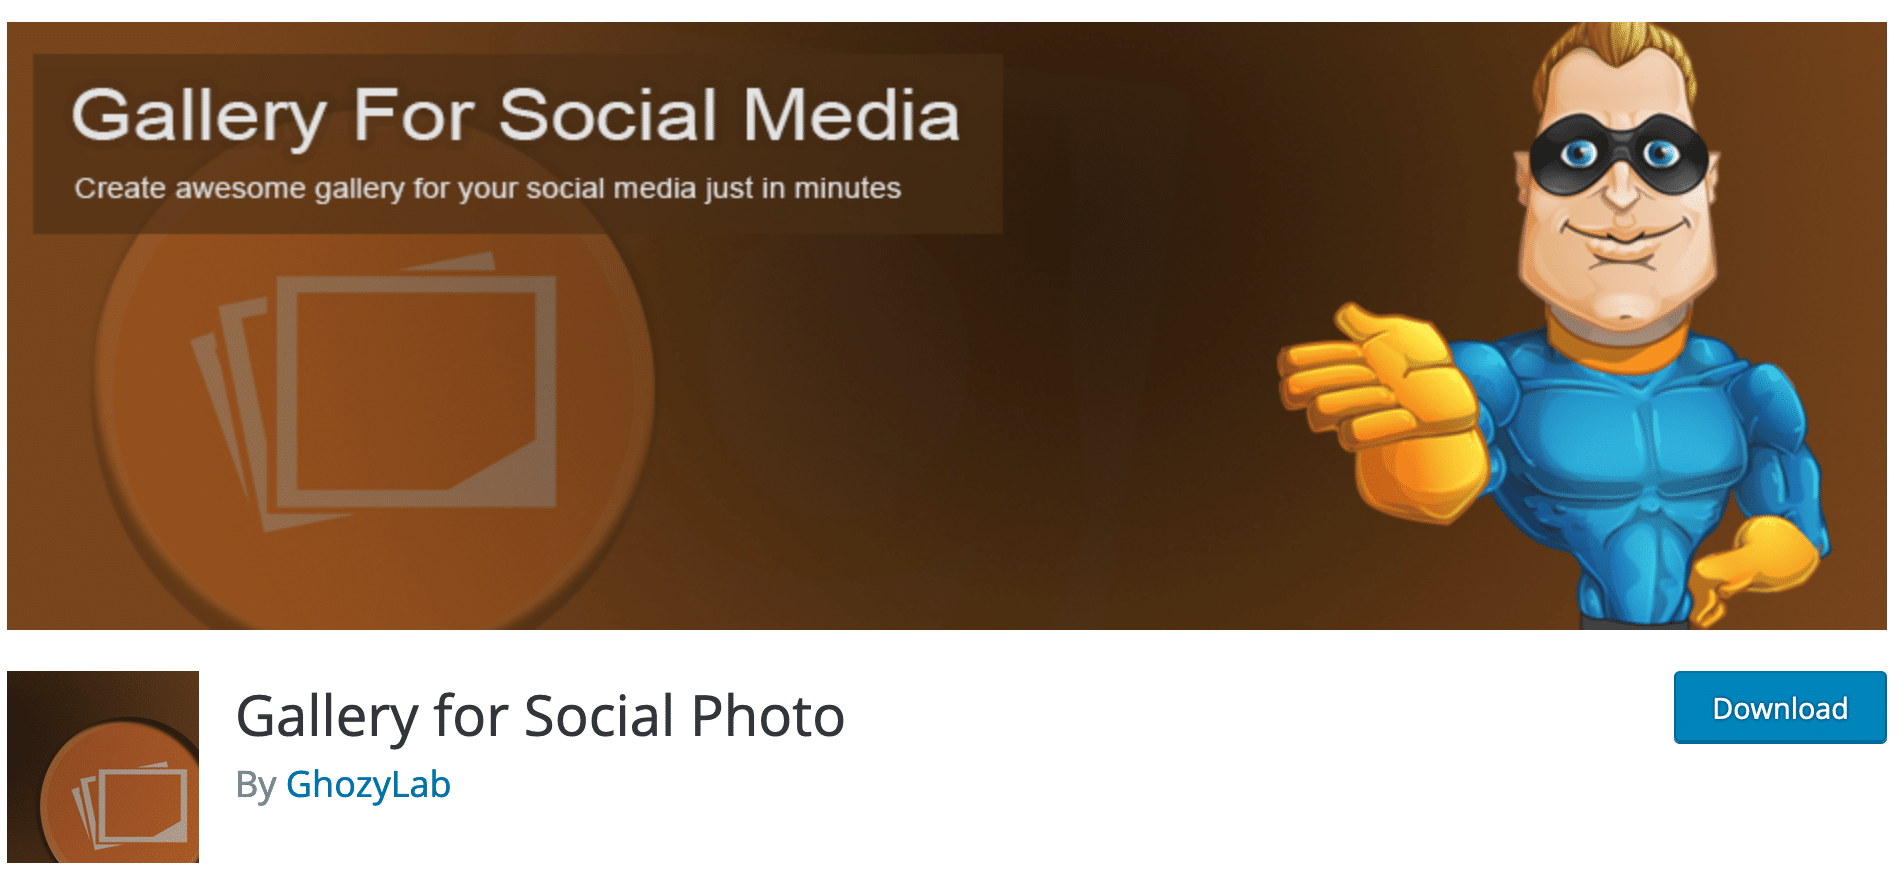 Gallery for Social Photo plugin on WordPress official directory.